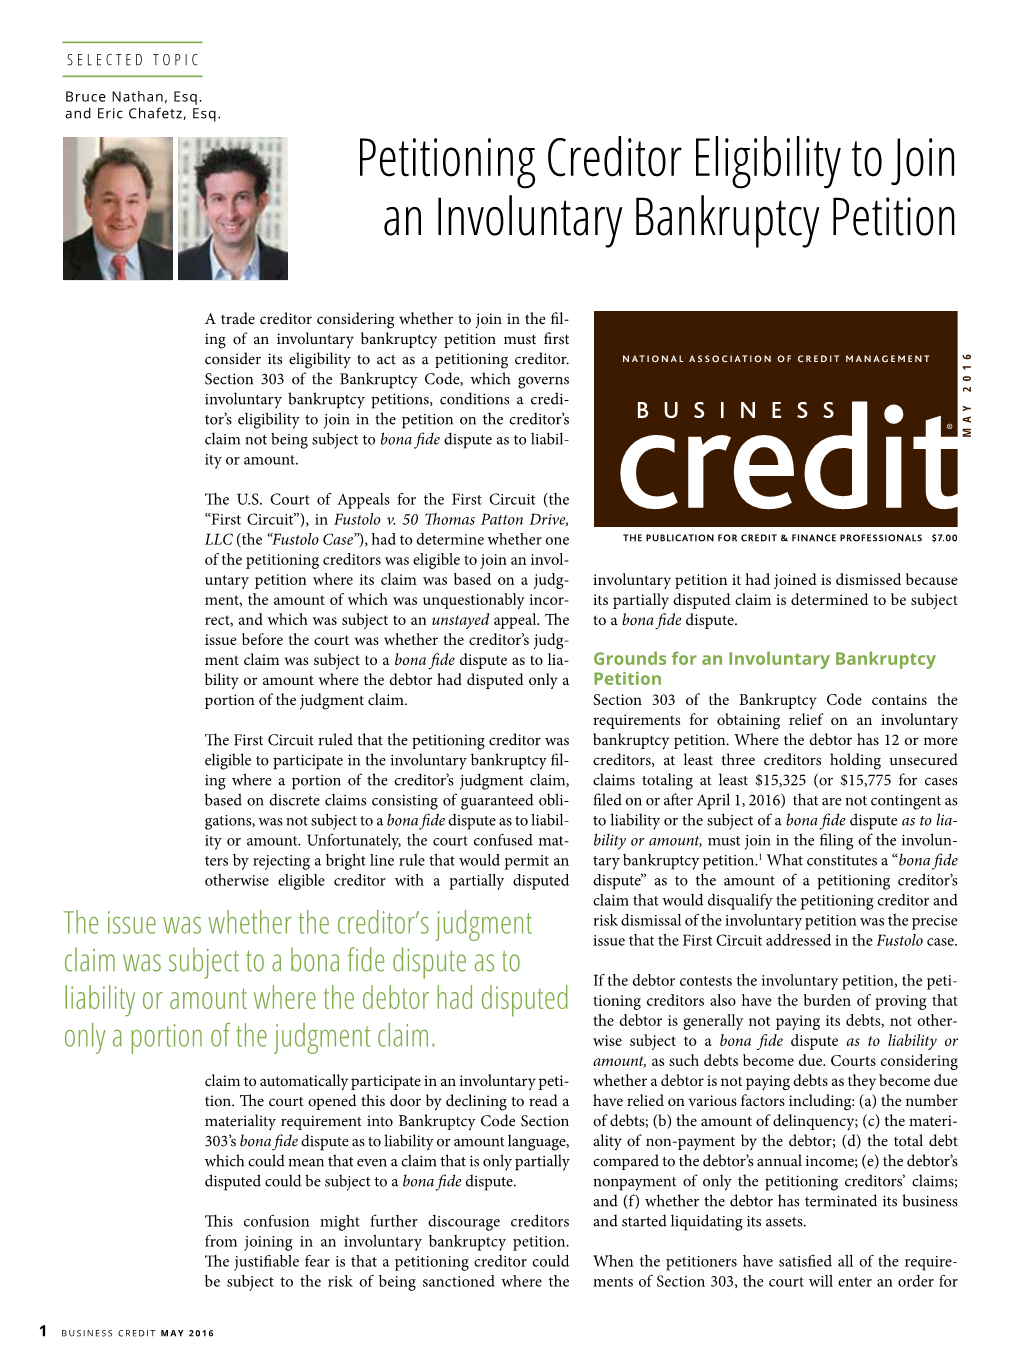 Petitioning Creditor Eligibility to Join an Involuntary Bankruptcy Petition